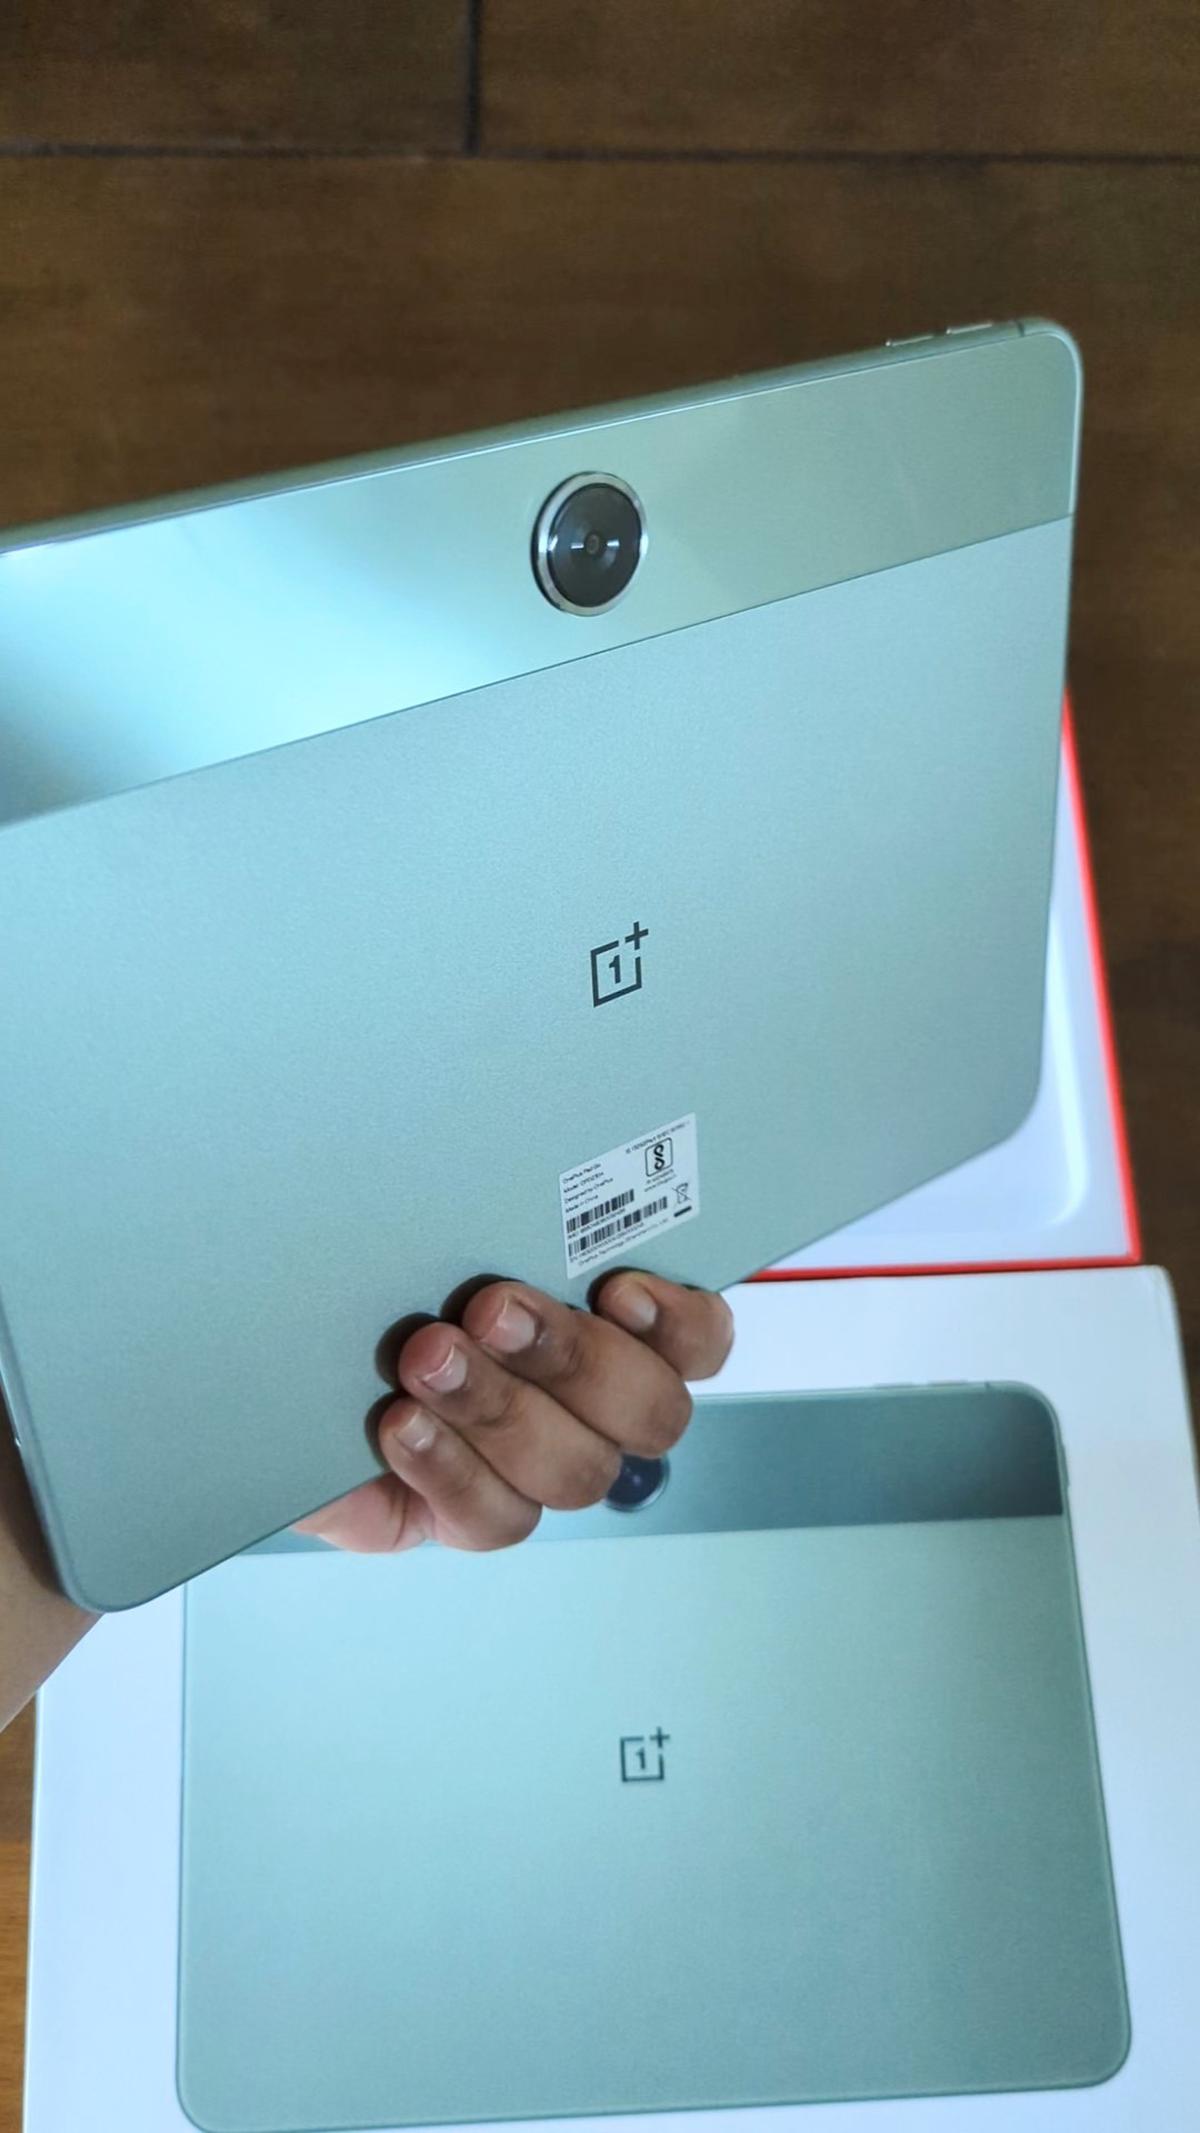 OnePlus Pad - Full tablet specifications